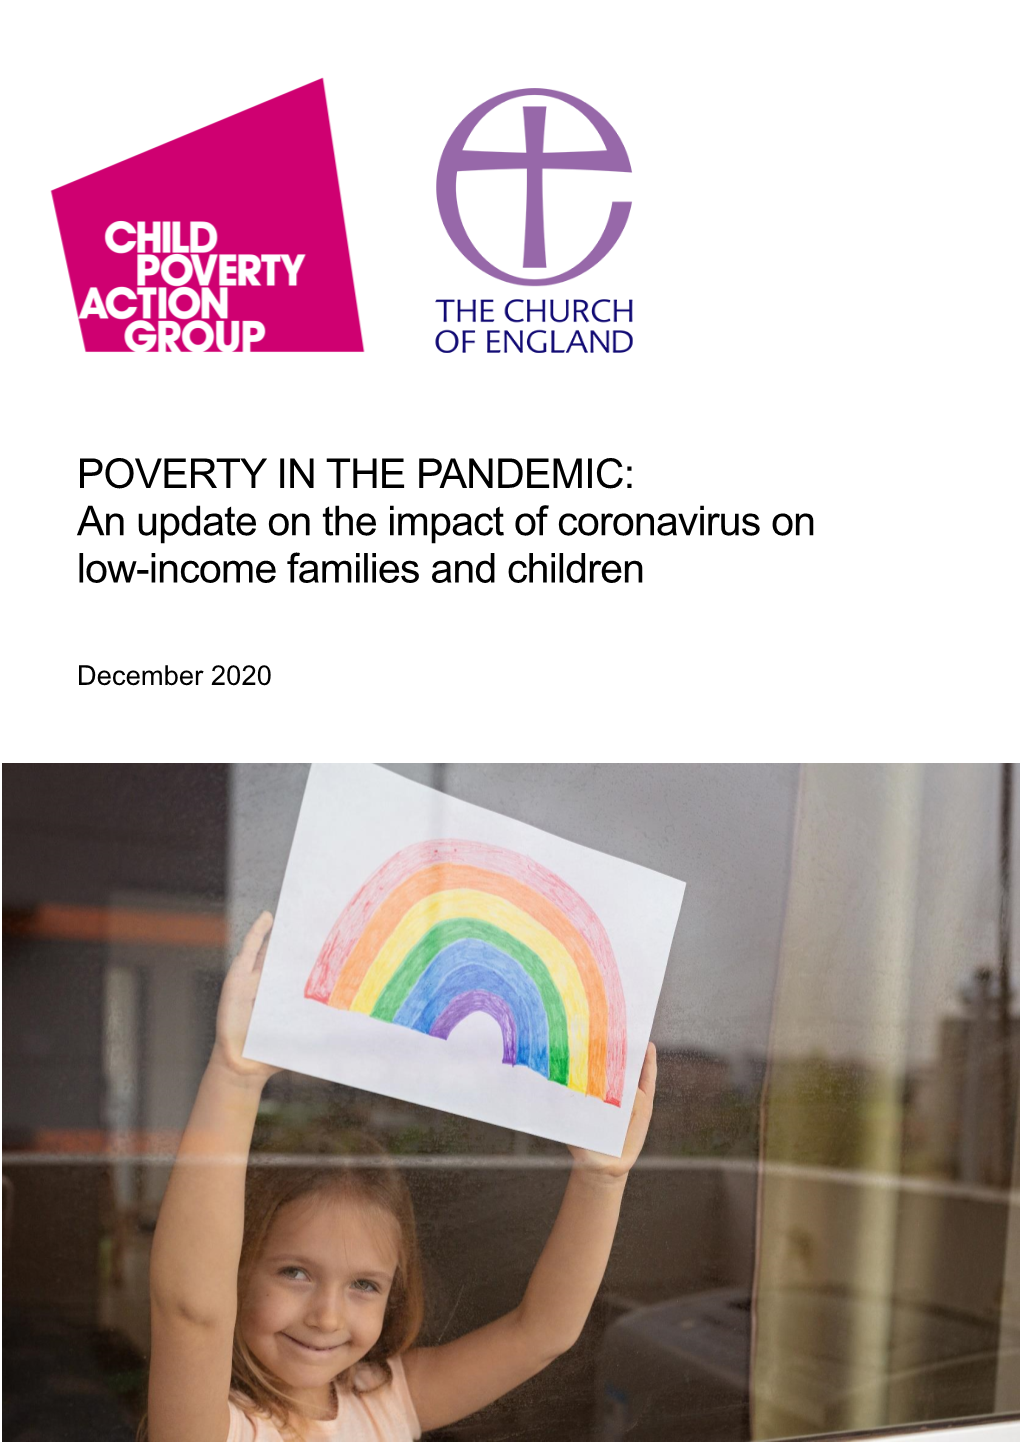 POVERTY in the PANDEMIC: an Update on the Impact of Coronavirus on Low-Income Families and Children